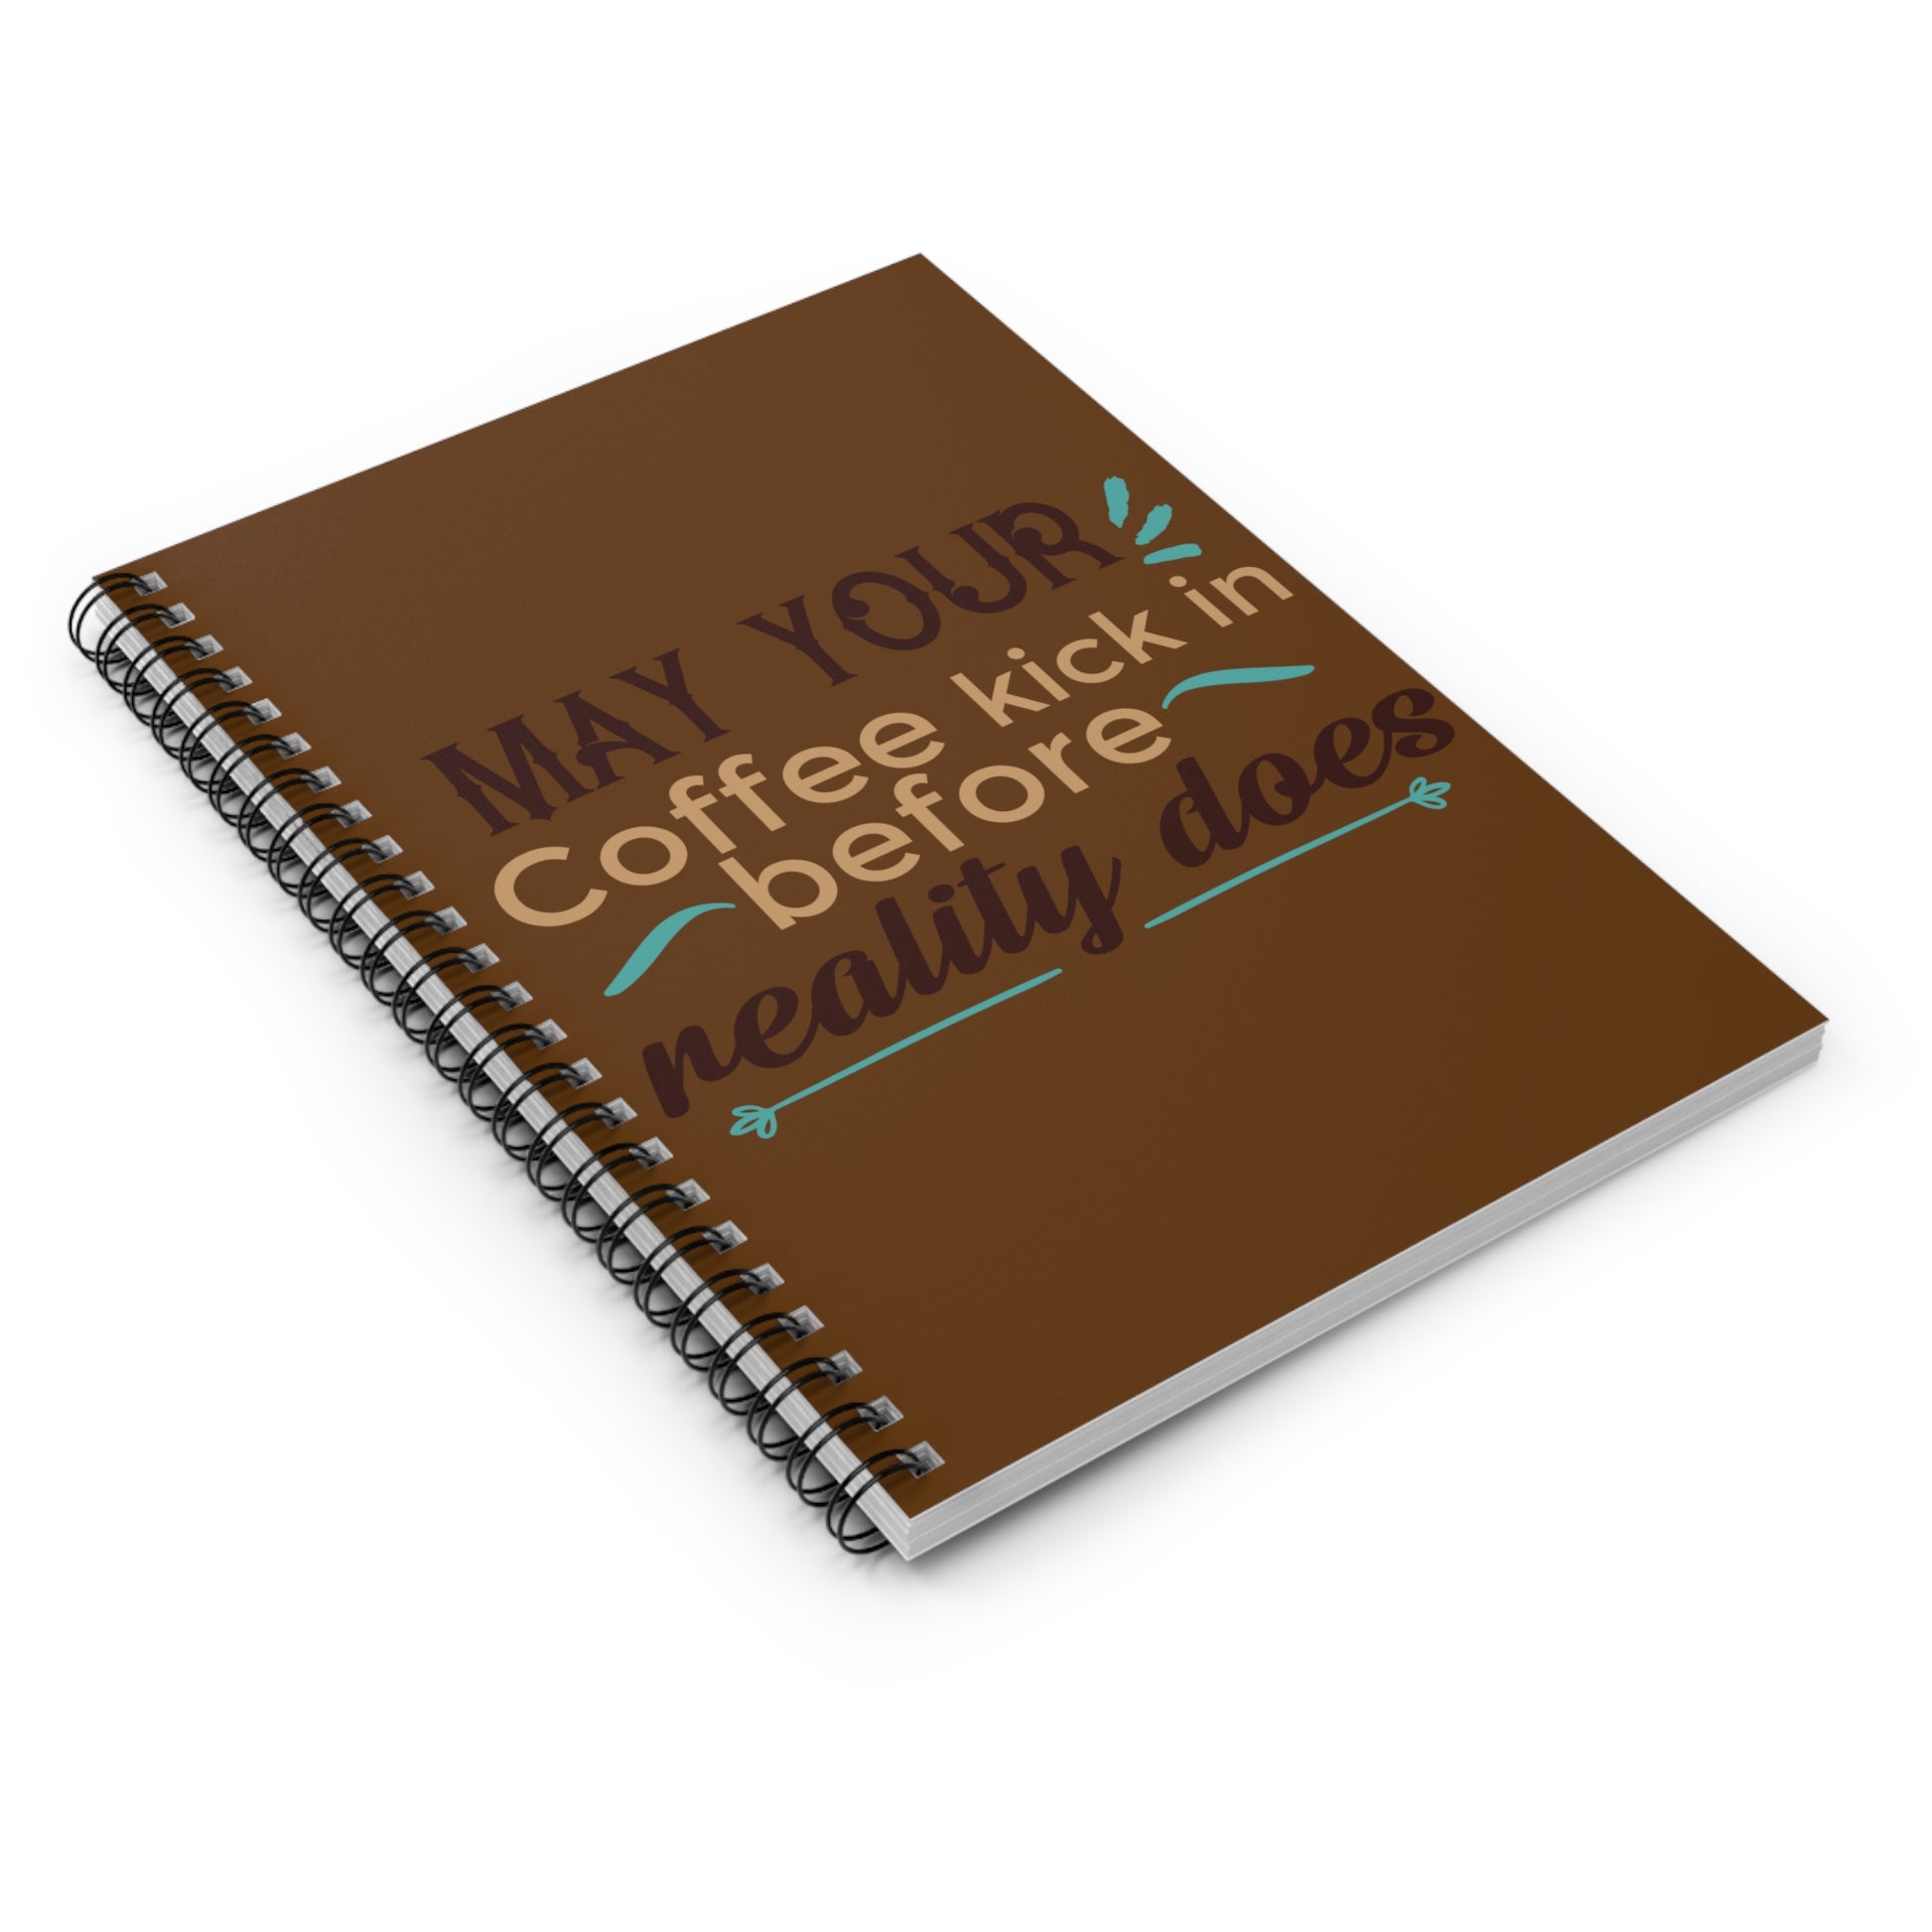 May Your Coffee Kick In: Spiral Notebook - Log Books - Journals - Diaries - and More Custom Printed by TheGlassyLass